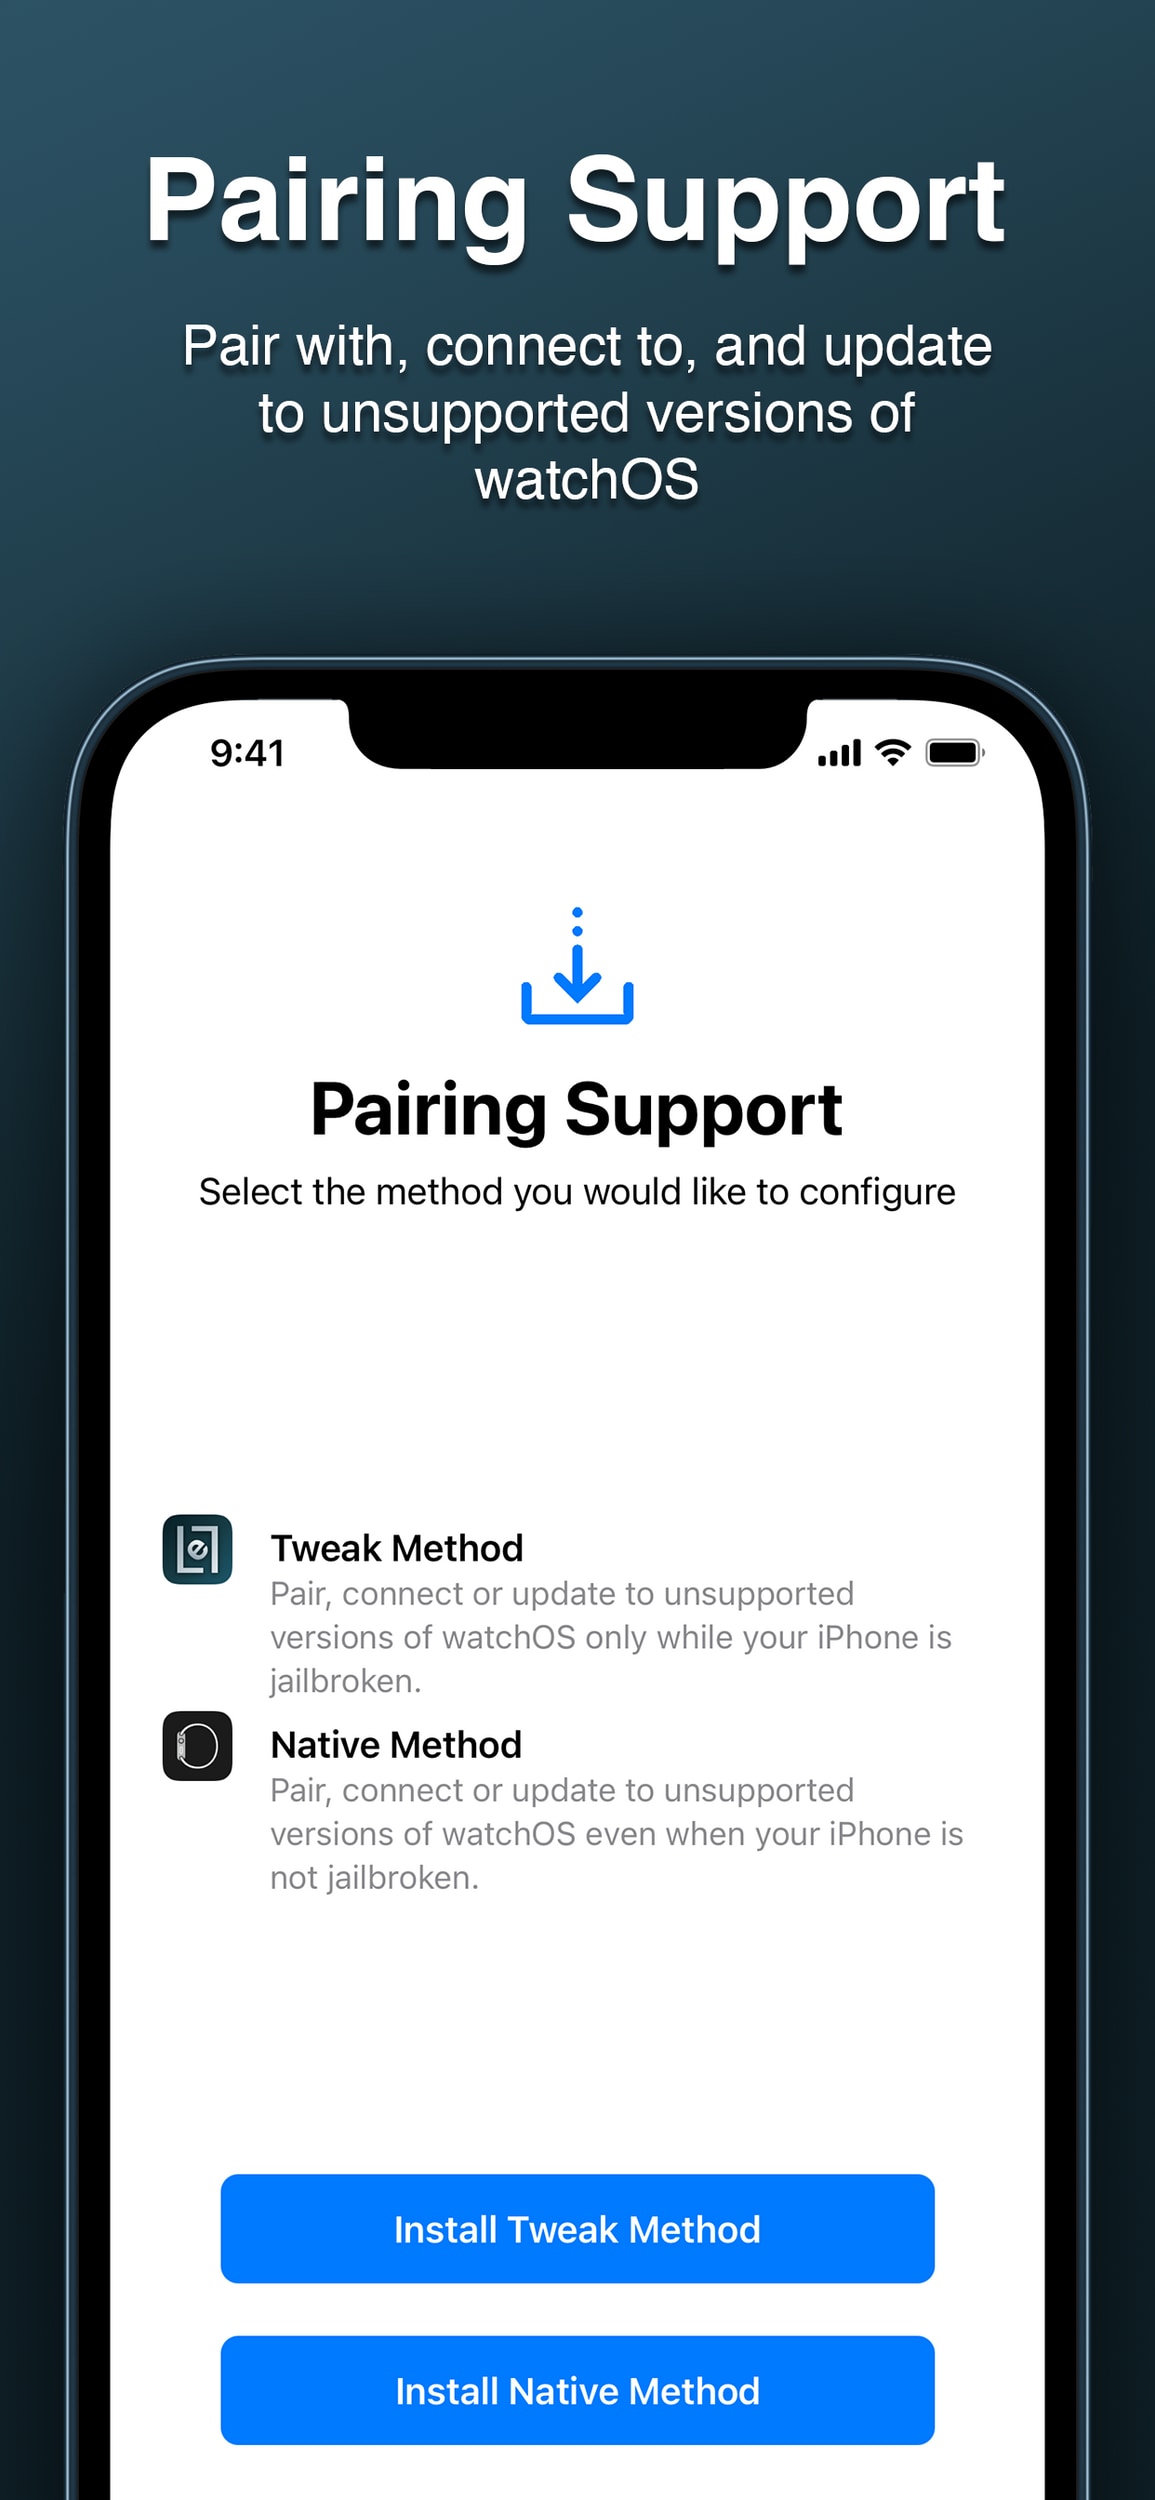 Legizmo's Pairing Support screen, which allows you to pair with, connect to, and update to unsupported versions of watchOS